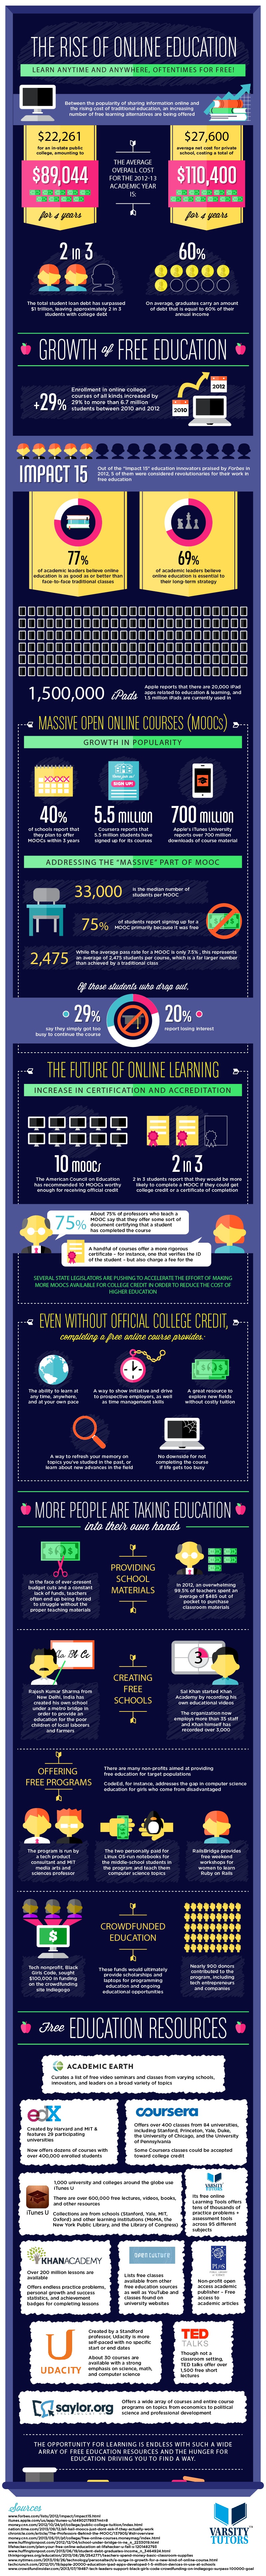 The Rise of Free Online Education Infographic